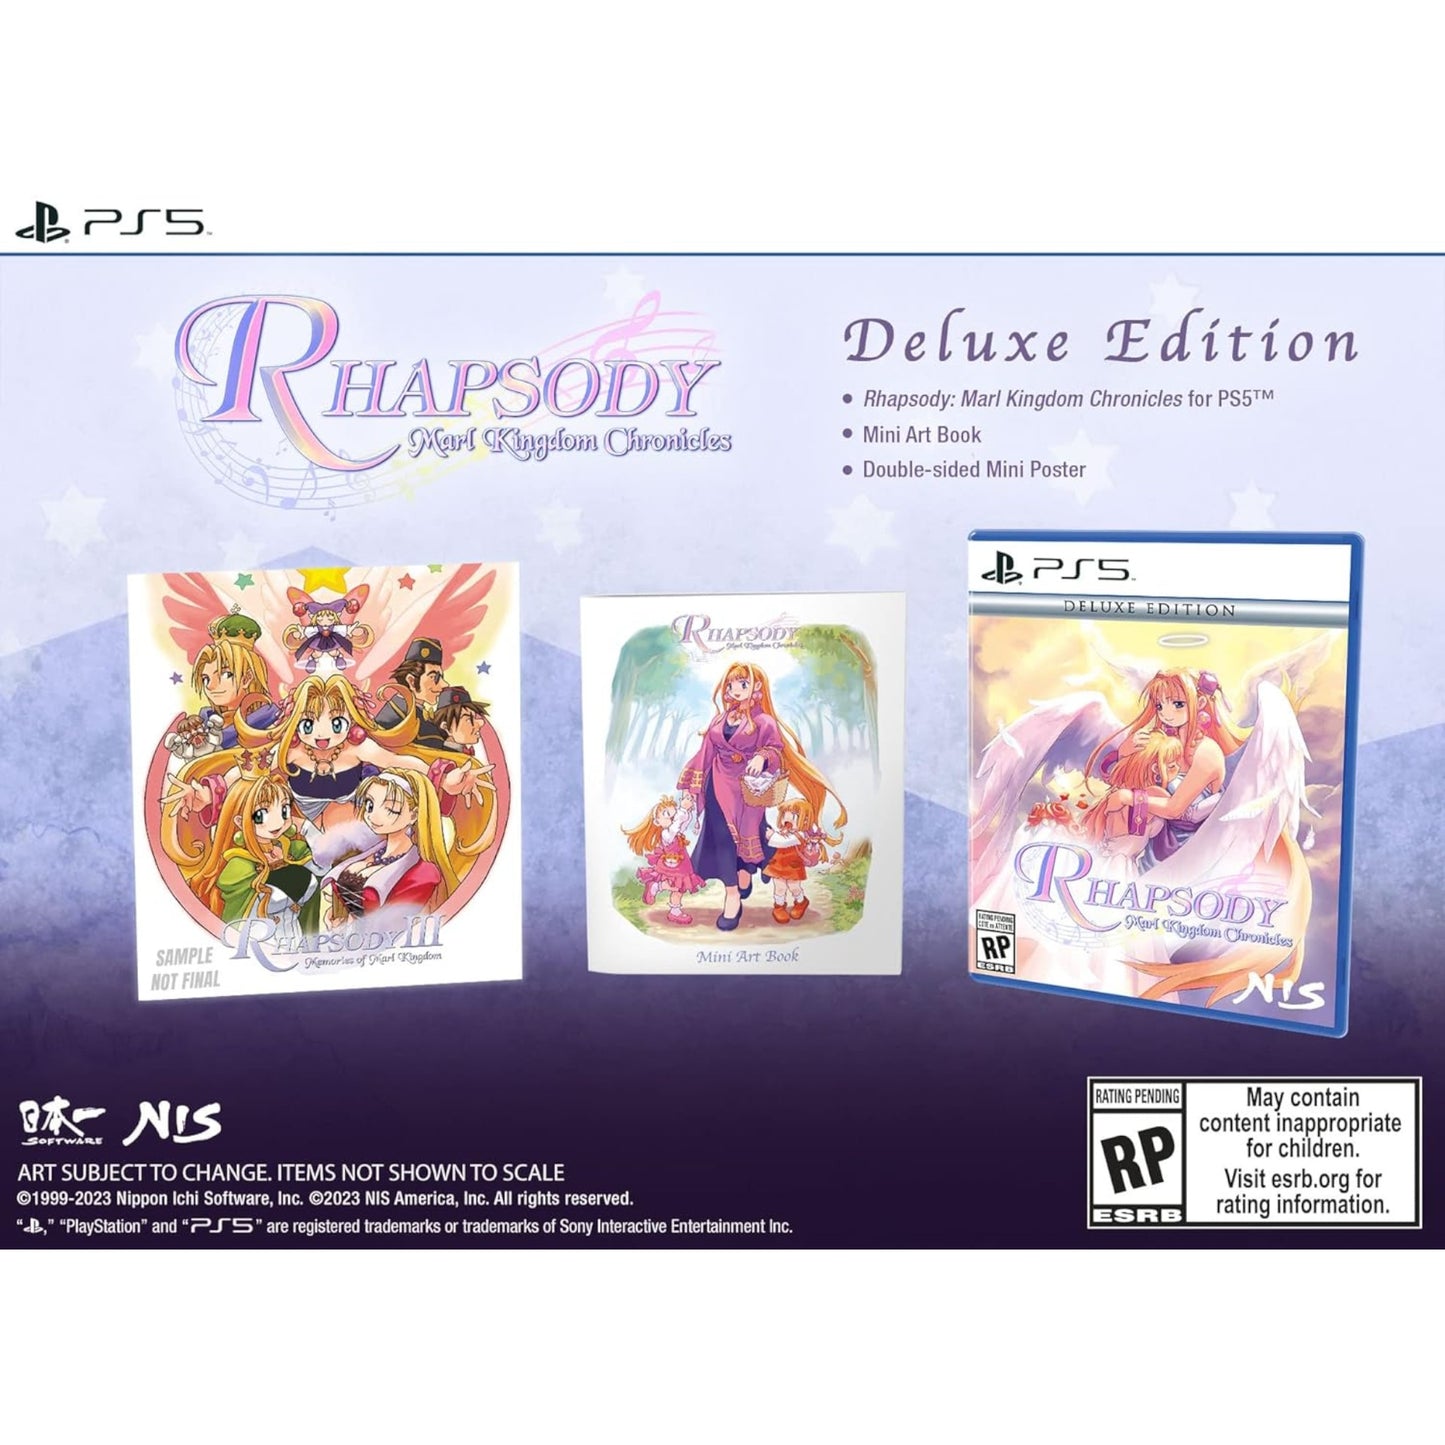 Rhapsody: Marl Kingdom Chronicles Deluxe Edition PS5 - A Musical RPG Journey Awaits! - Ricky's Garage